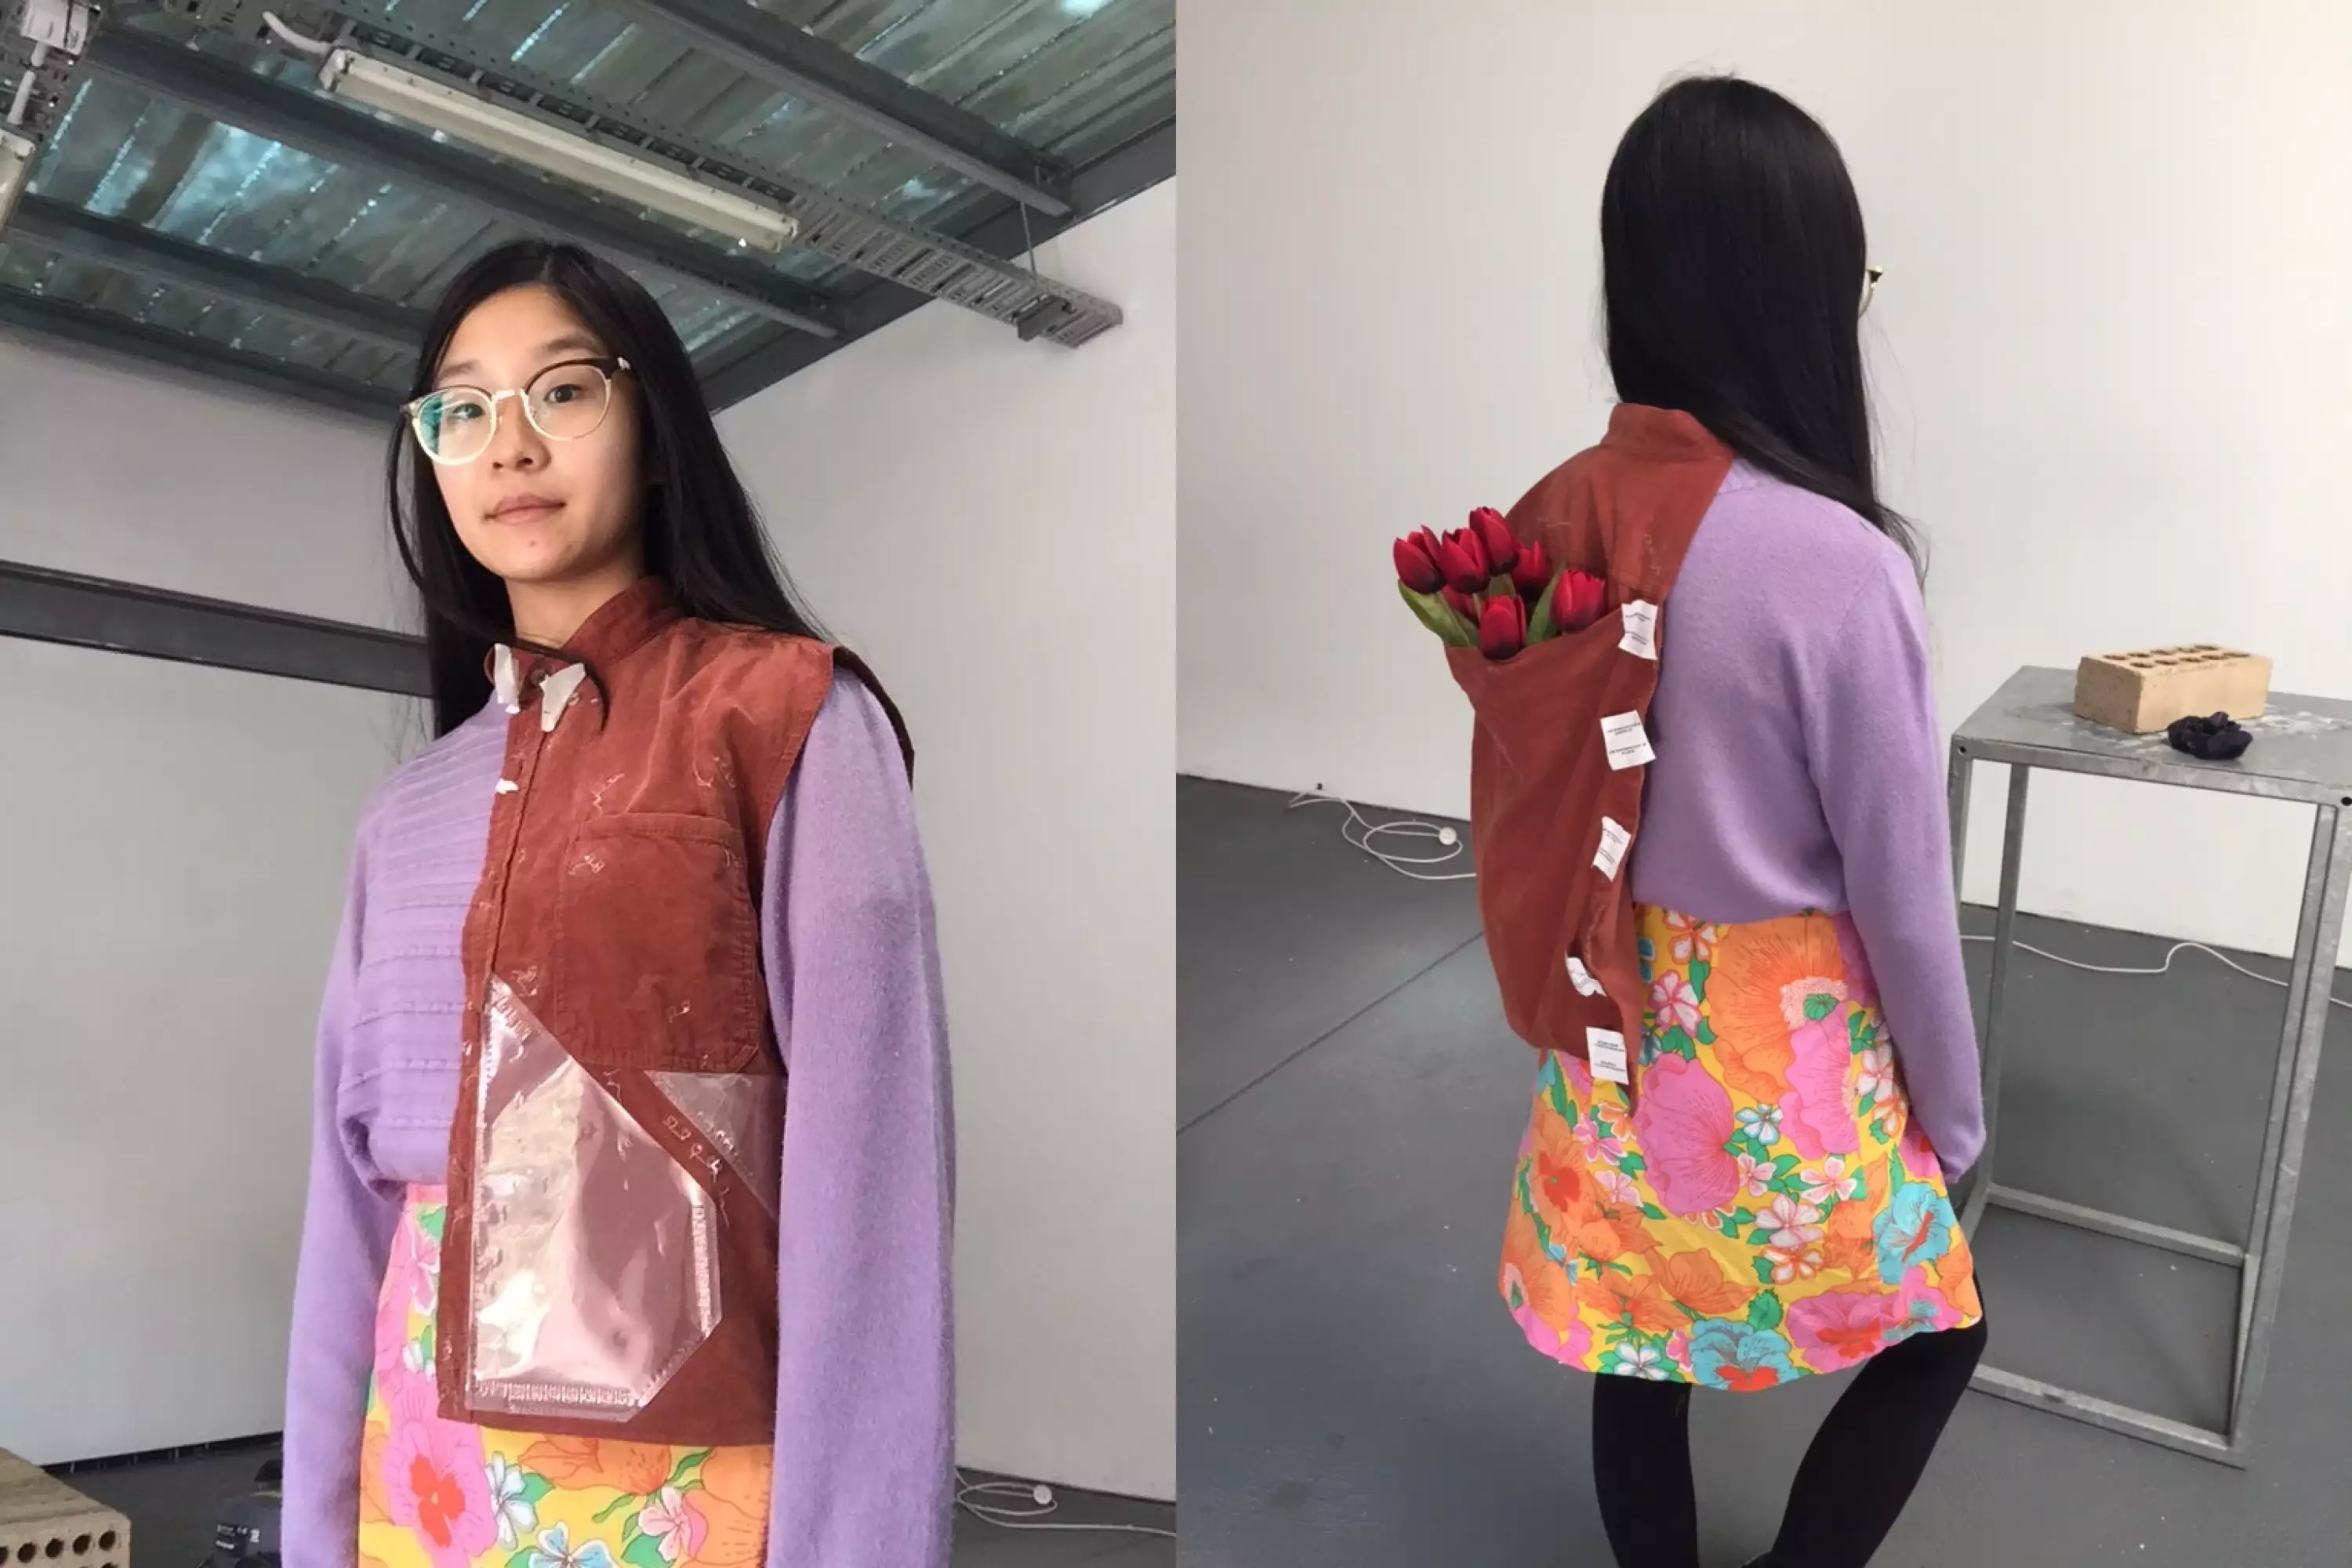 Front and back view of a woman trying out an experimental vest / bag.